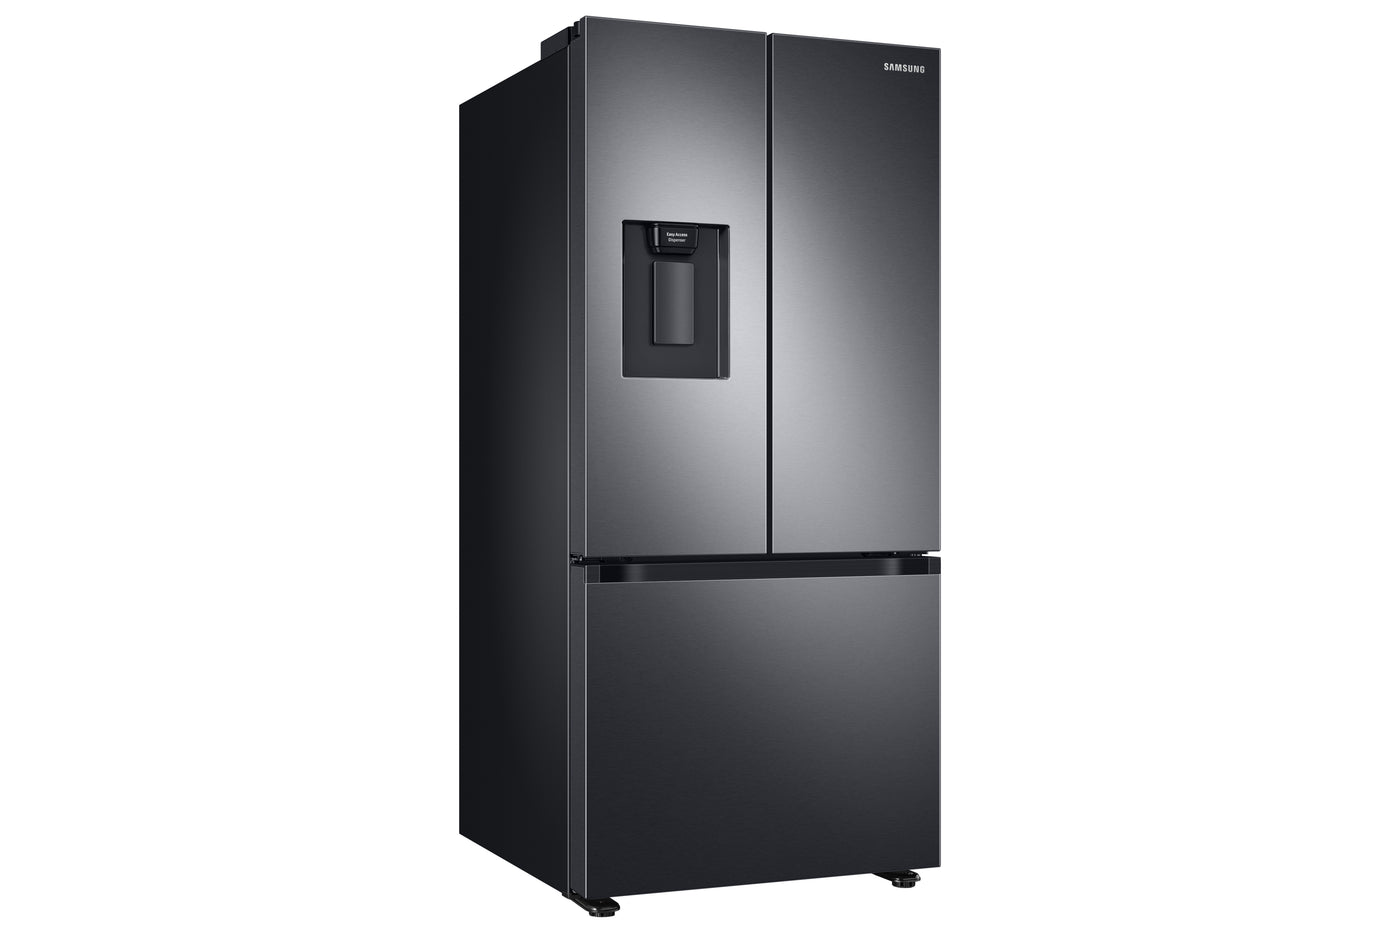 Samsung Black Stainless French Door Refrigerator with External Water Dispener (22.1 cu.ft.) - RF22A4221SG/AA